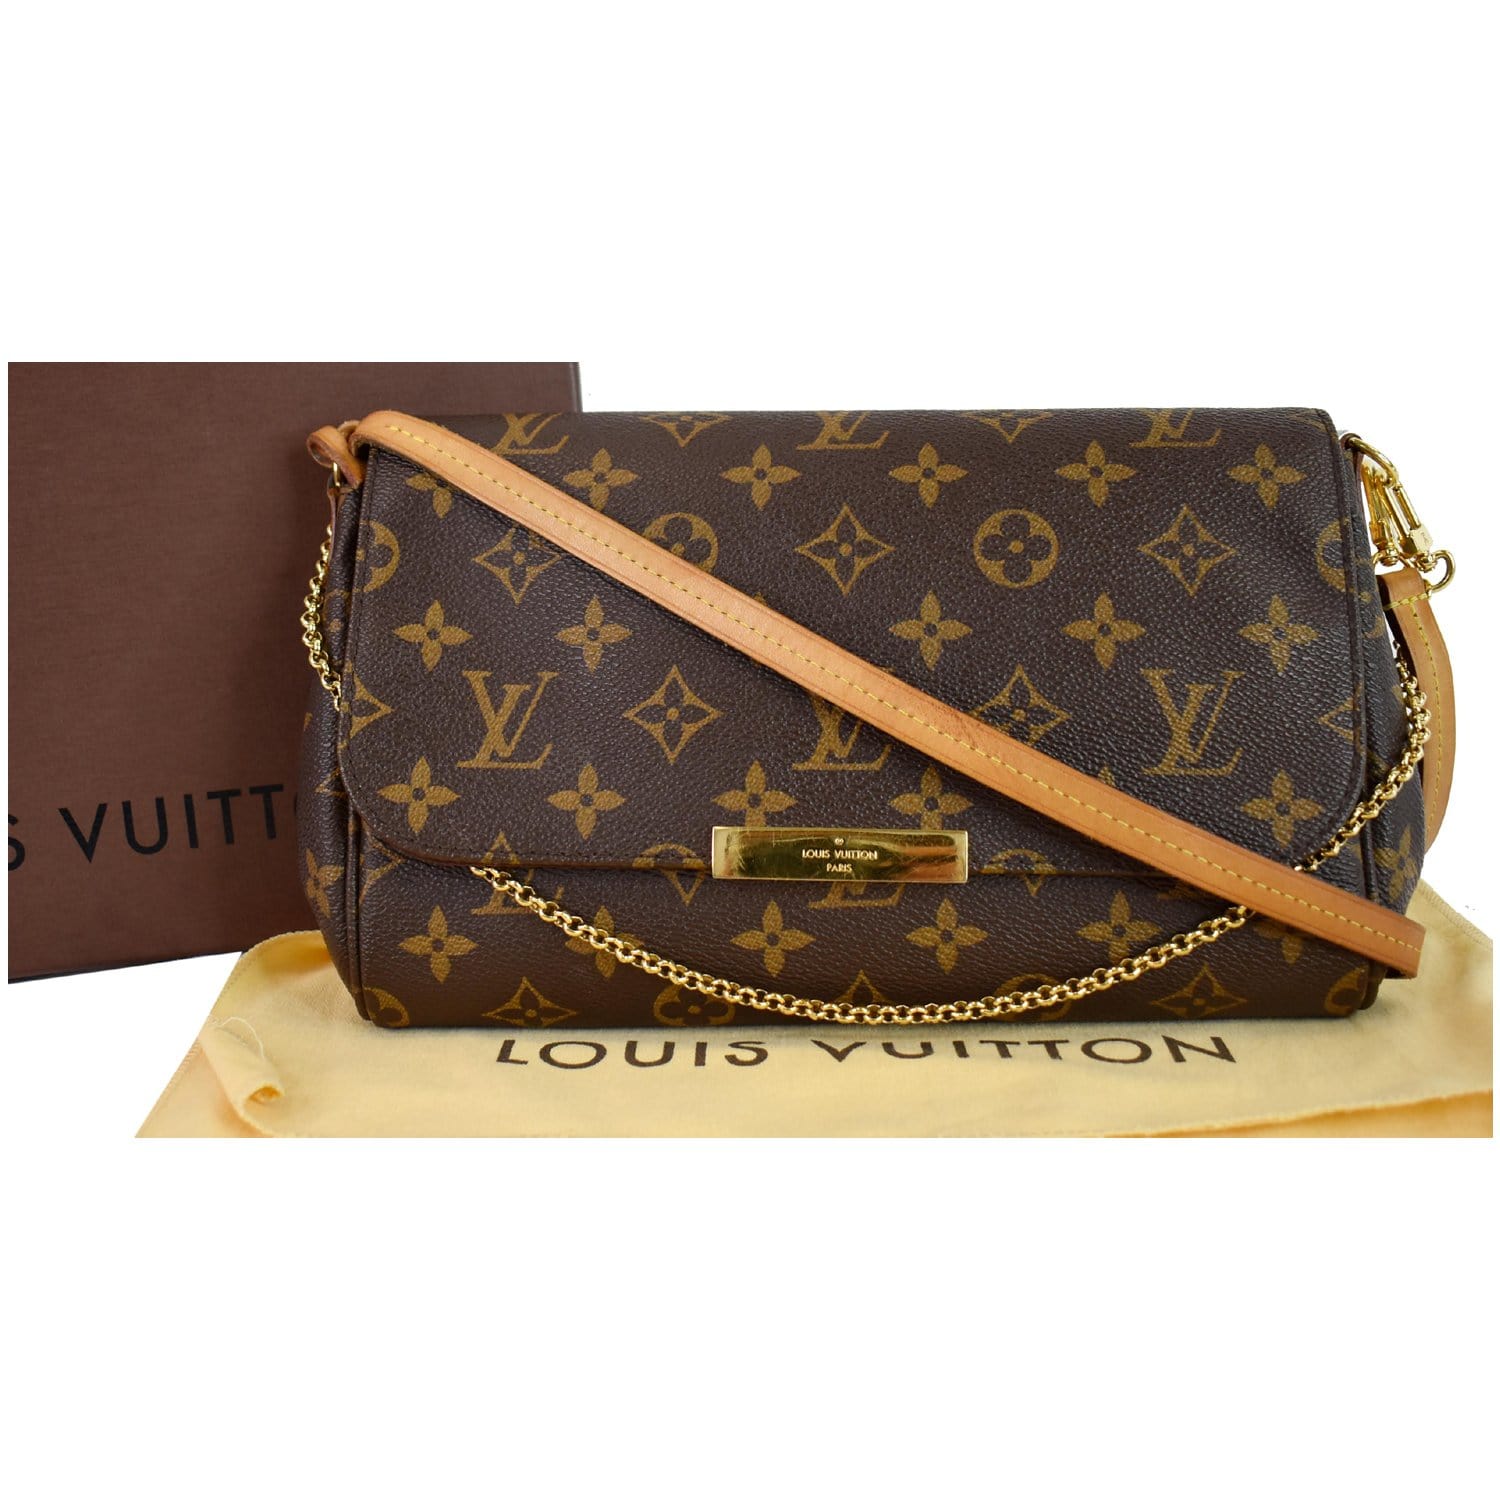 How To Spot Authentic Louis Vuitton Favorite MM Bag and Where To